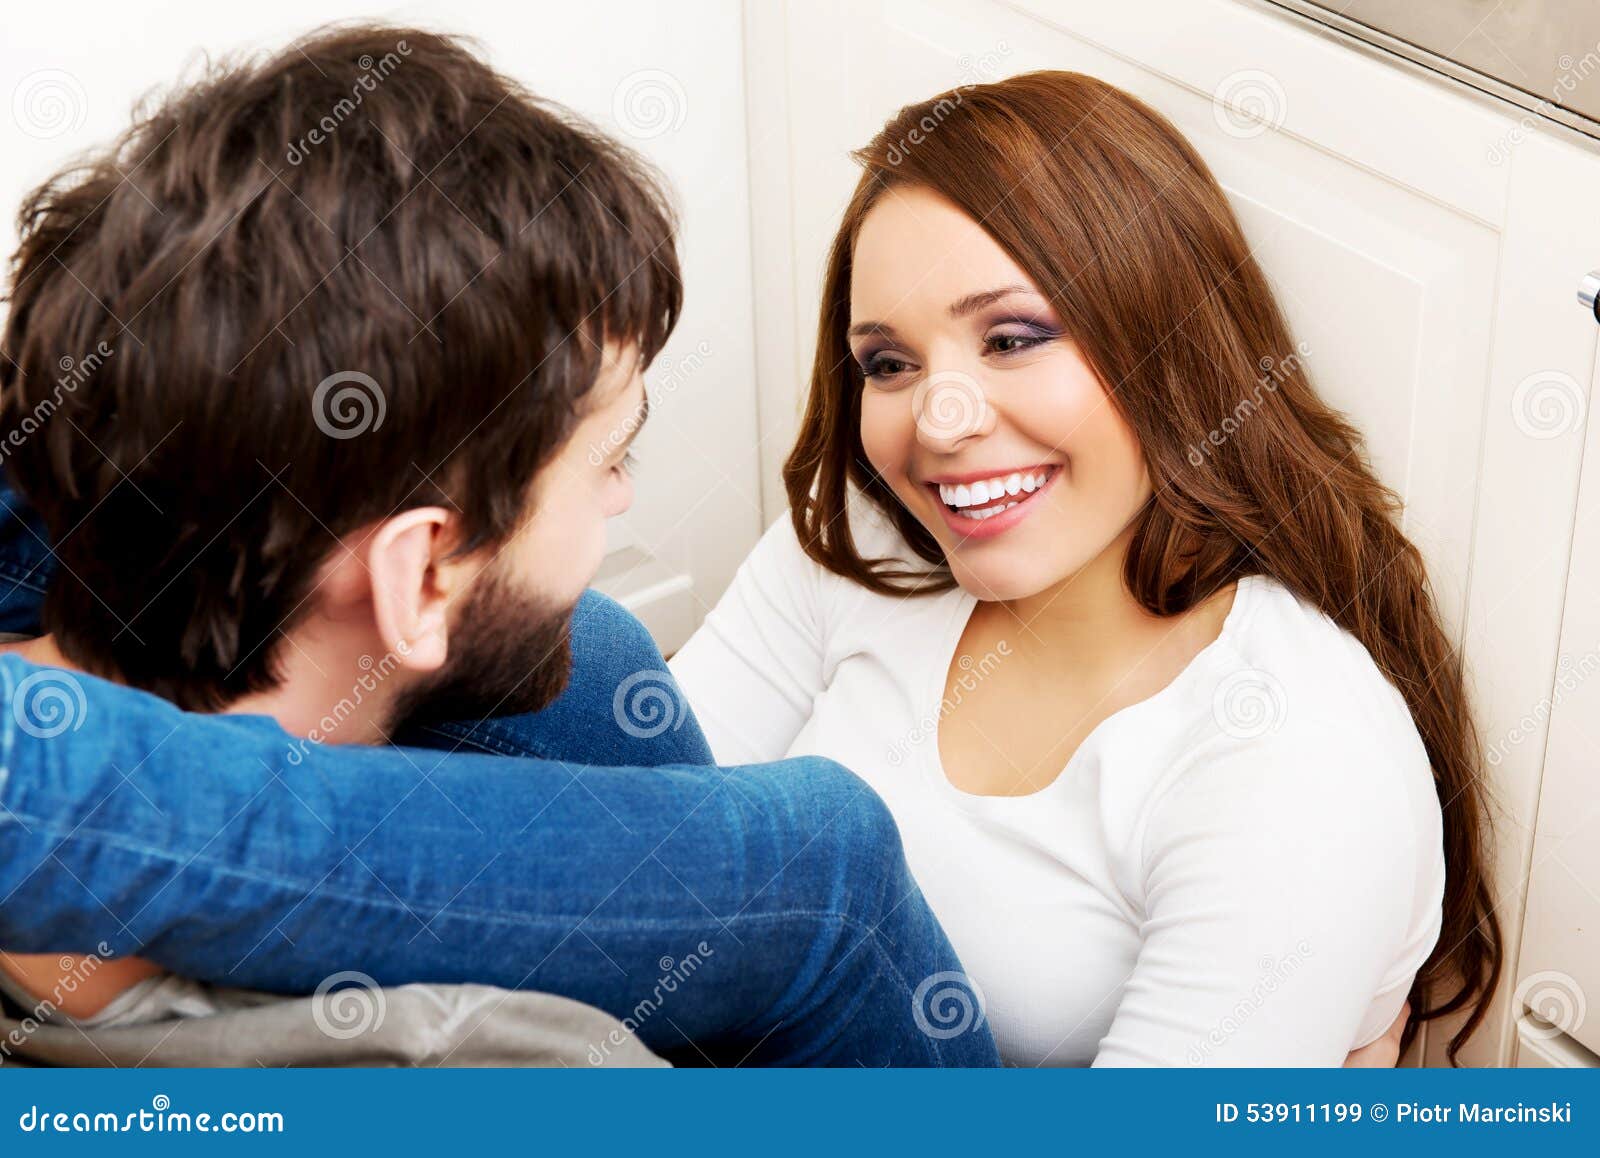 Romantic Couple Hugging in the Kitchen. Stock Image - Image of ...